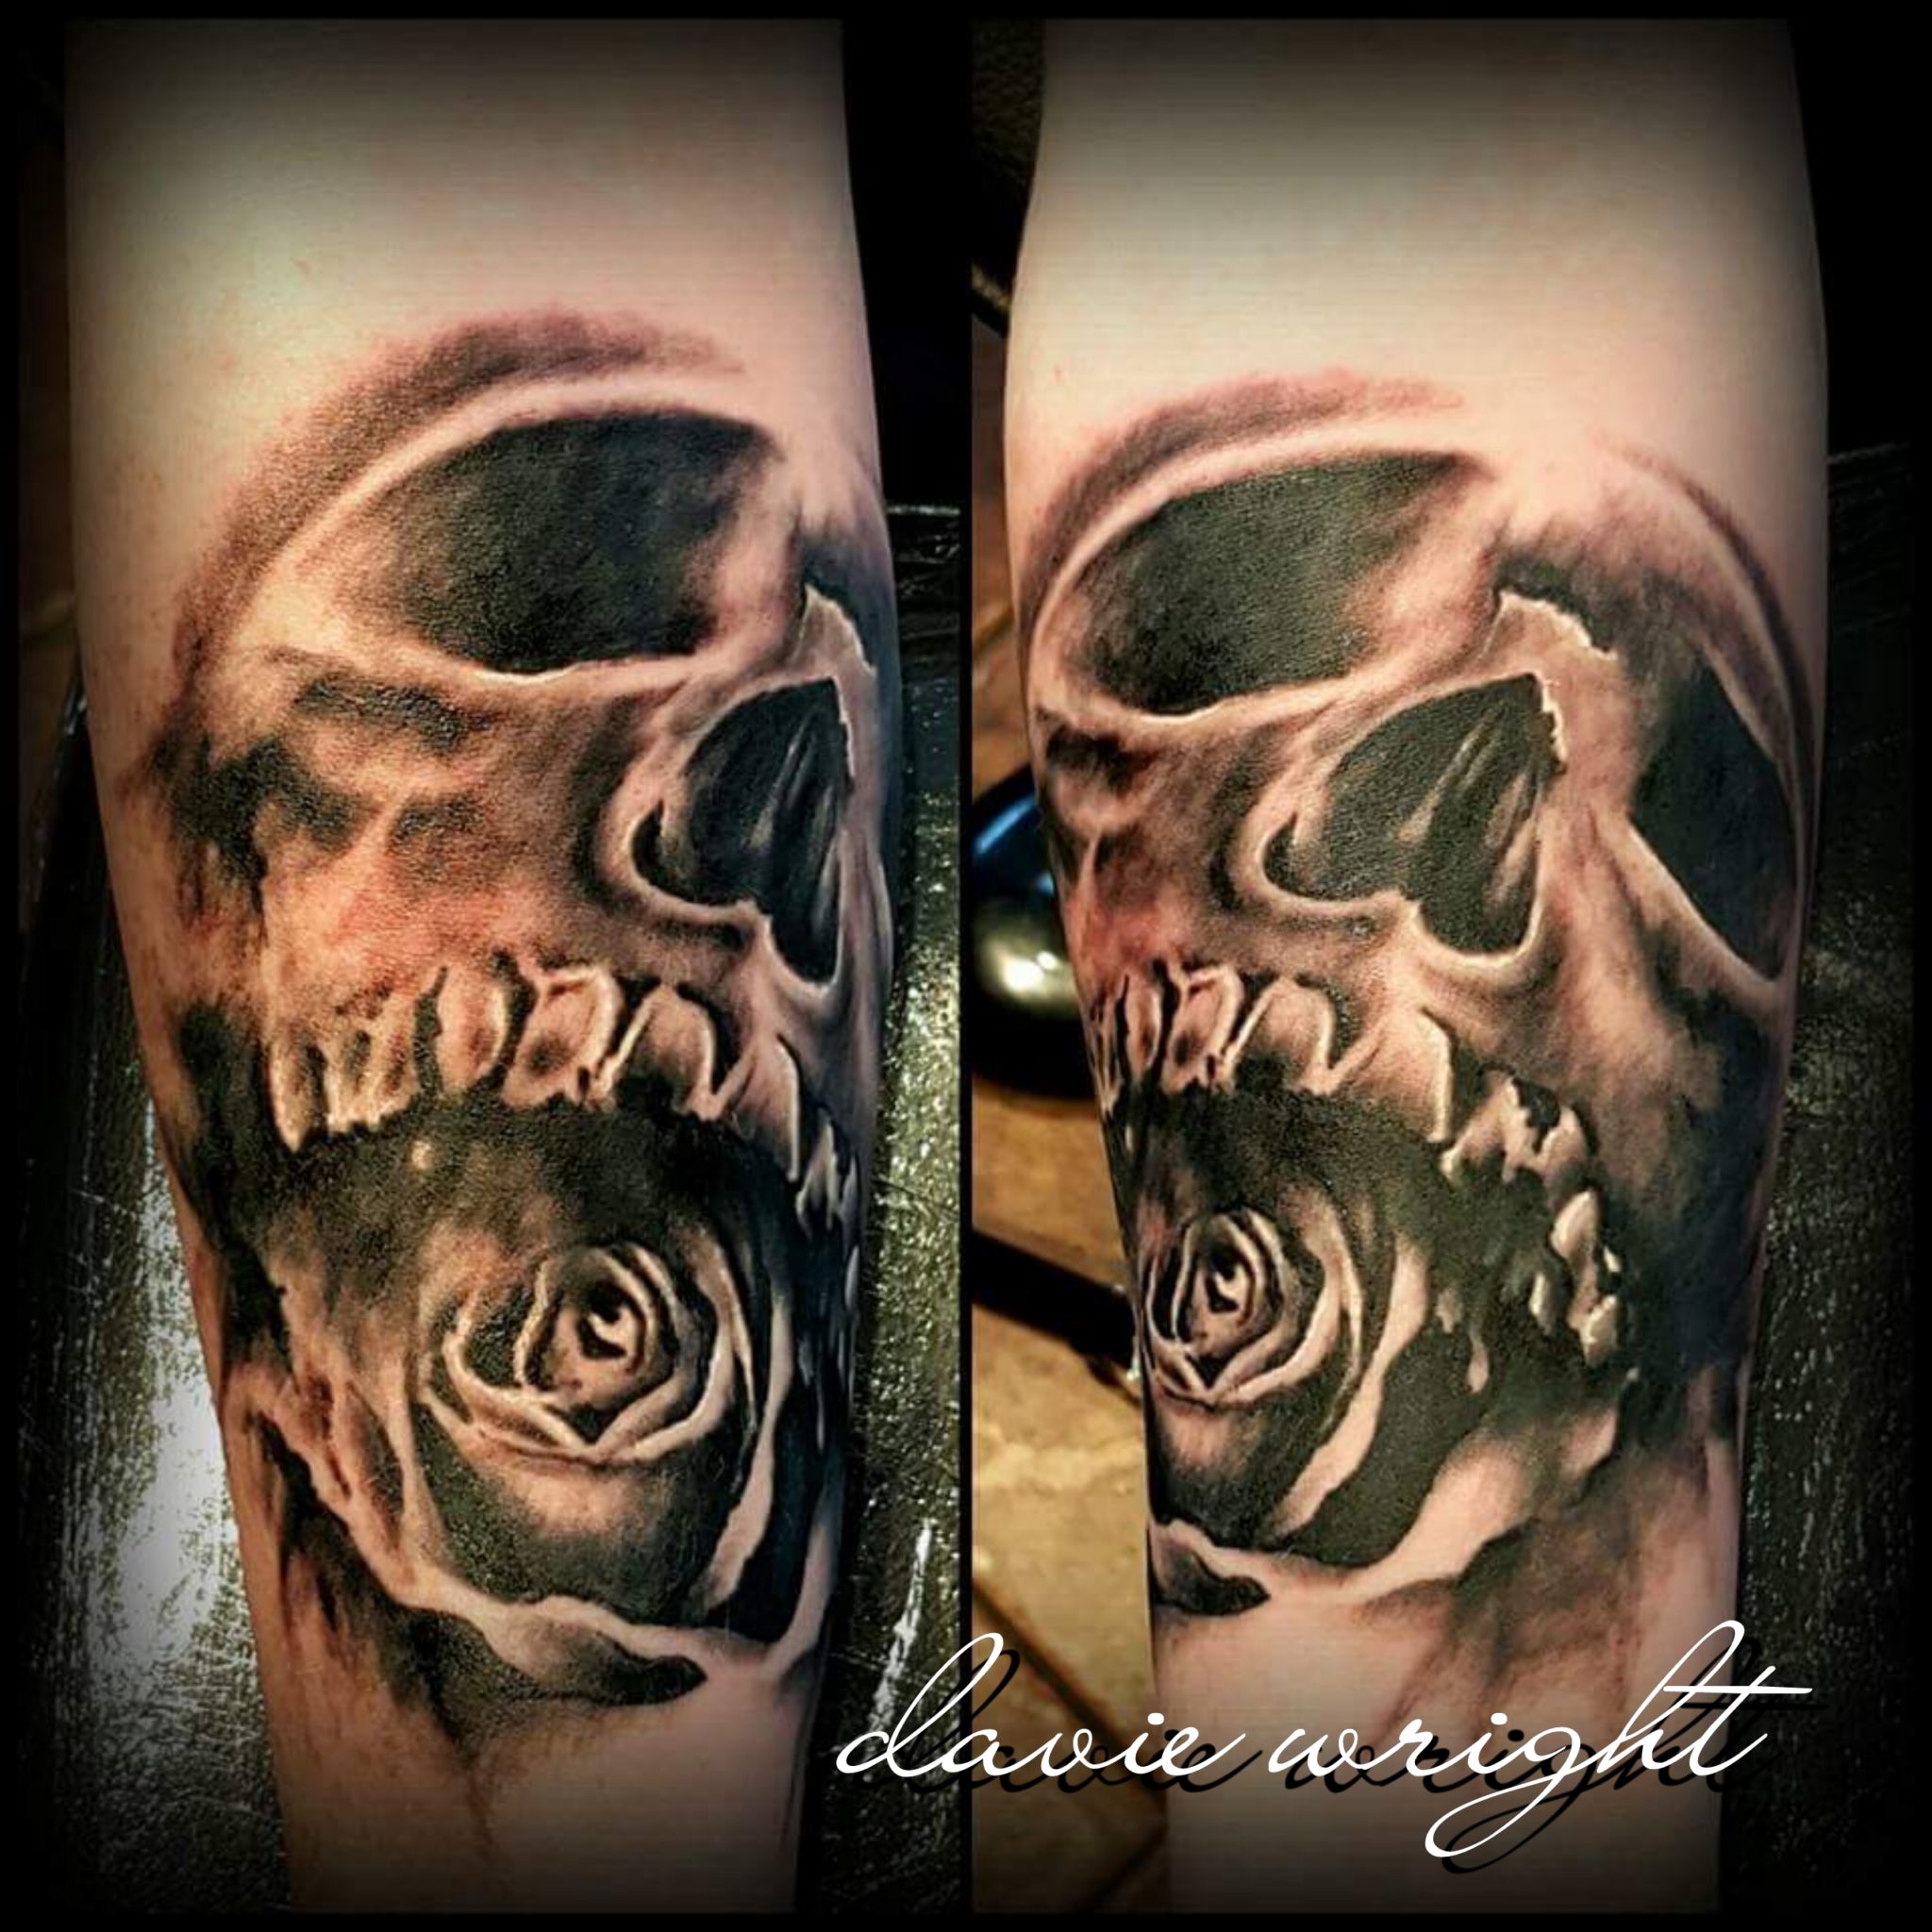 Andrea De Paola  Skull  Leave a the comment if you  Facebook